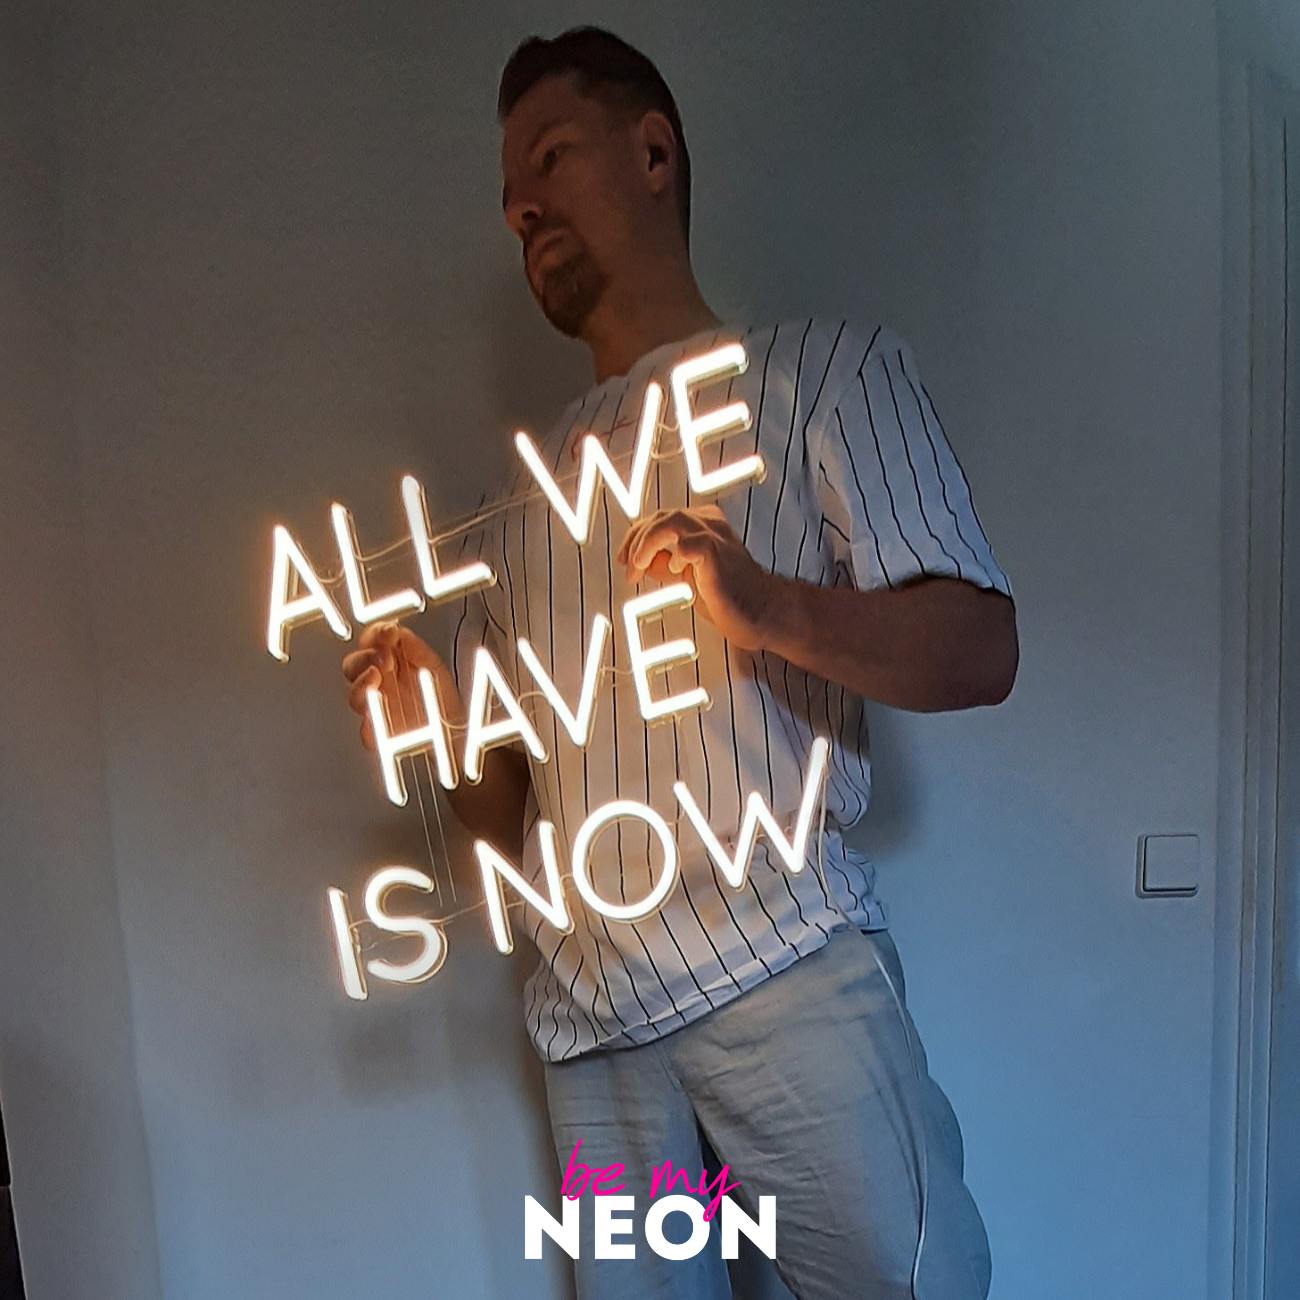 "All We Have Is Now" LED Neonschild